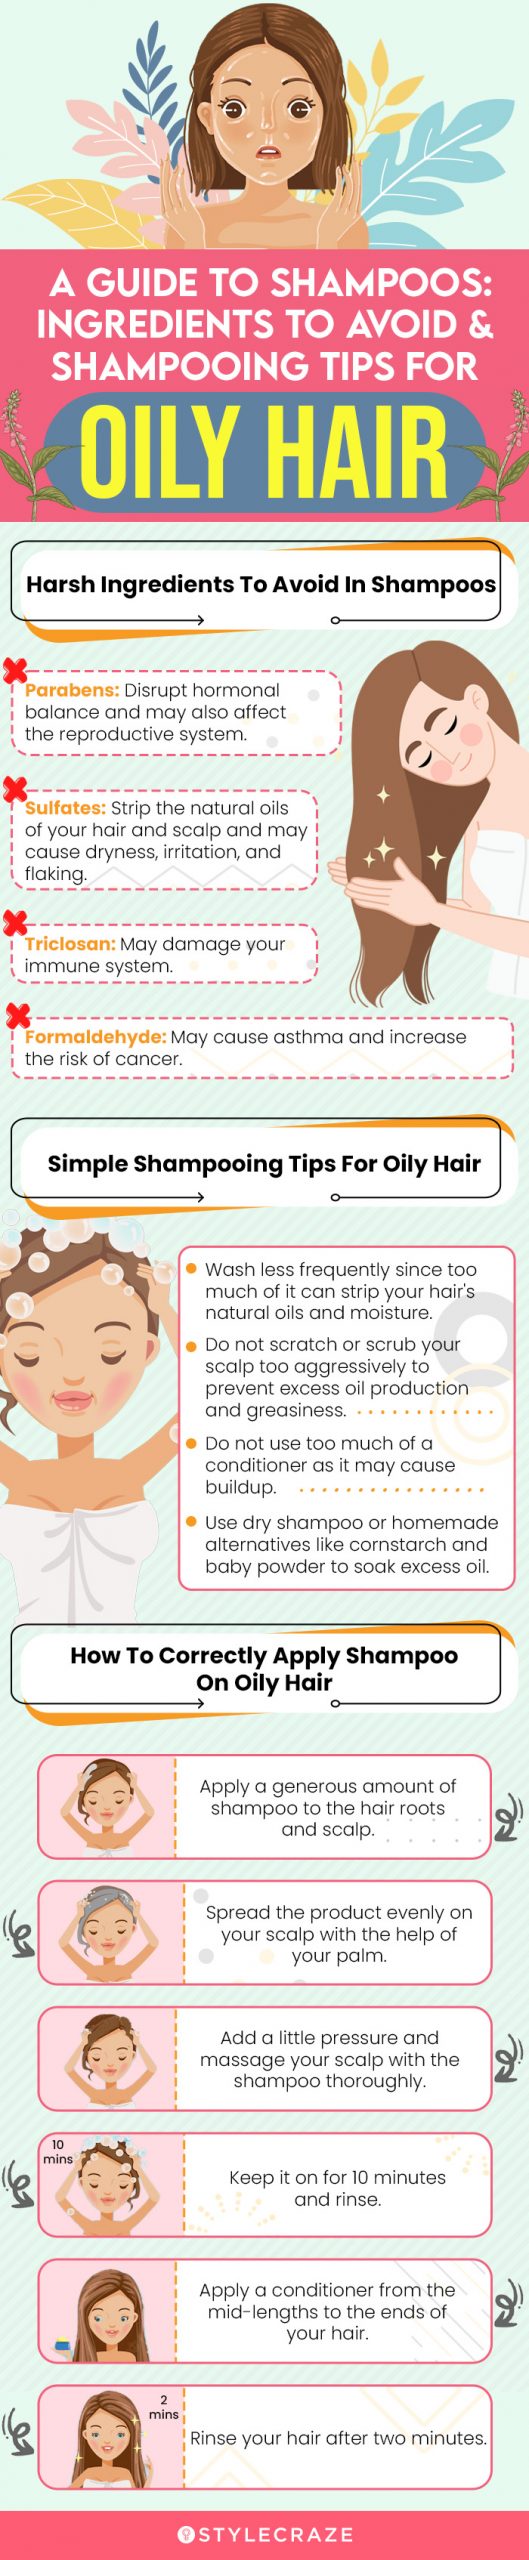 Ingredients To Avoid & Shampooing Tips For Oily Hair [infographic]